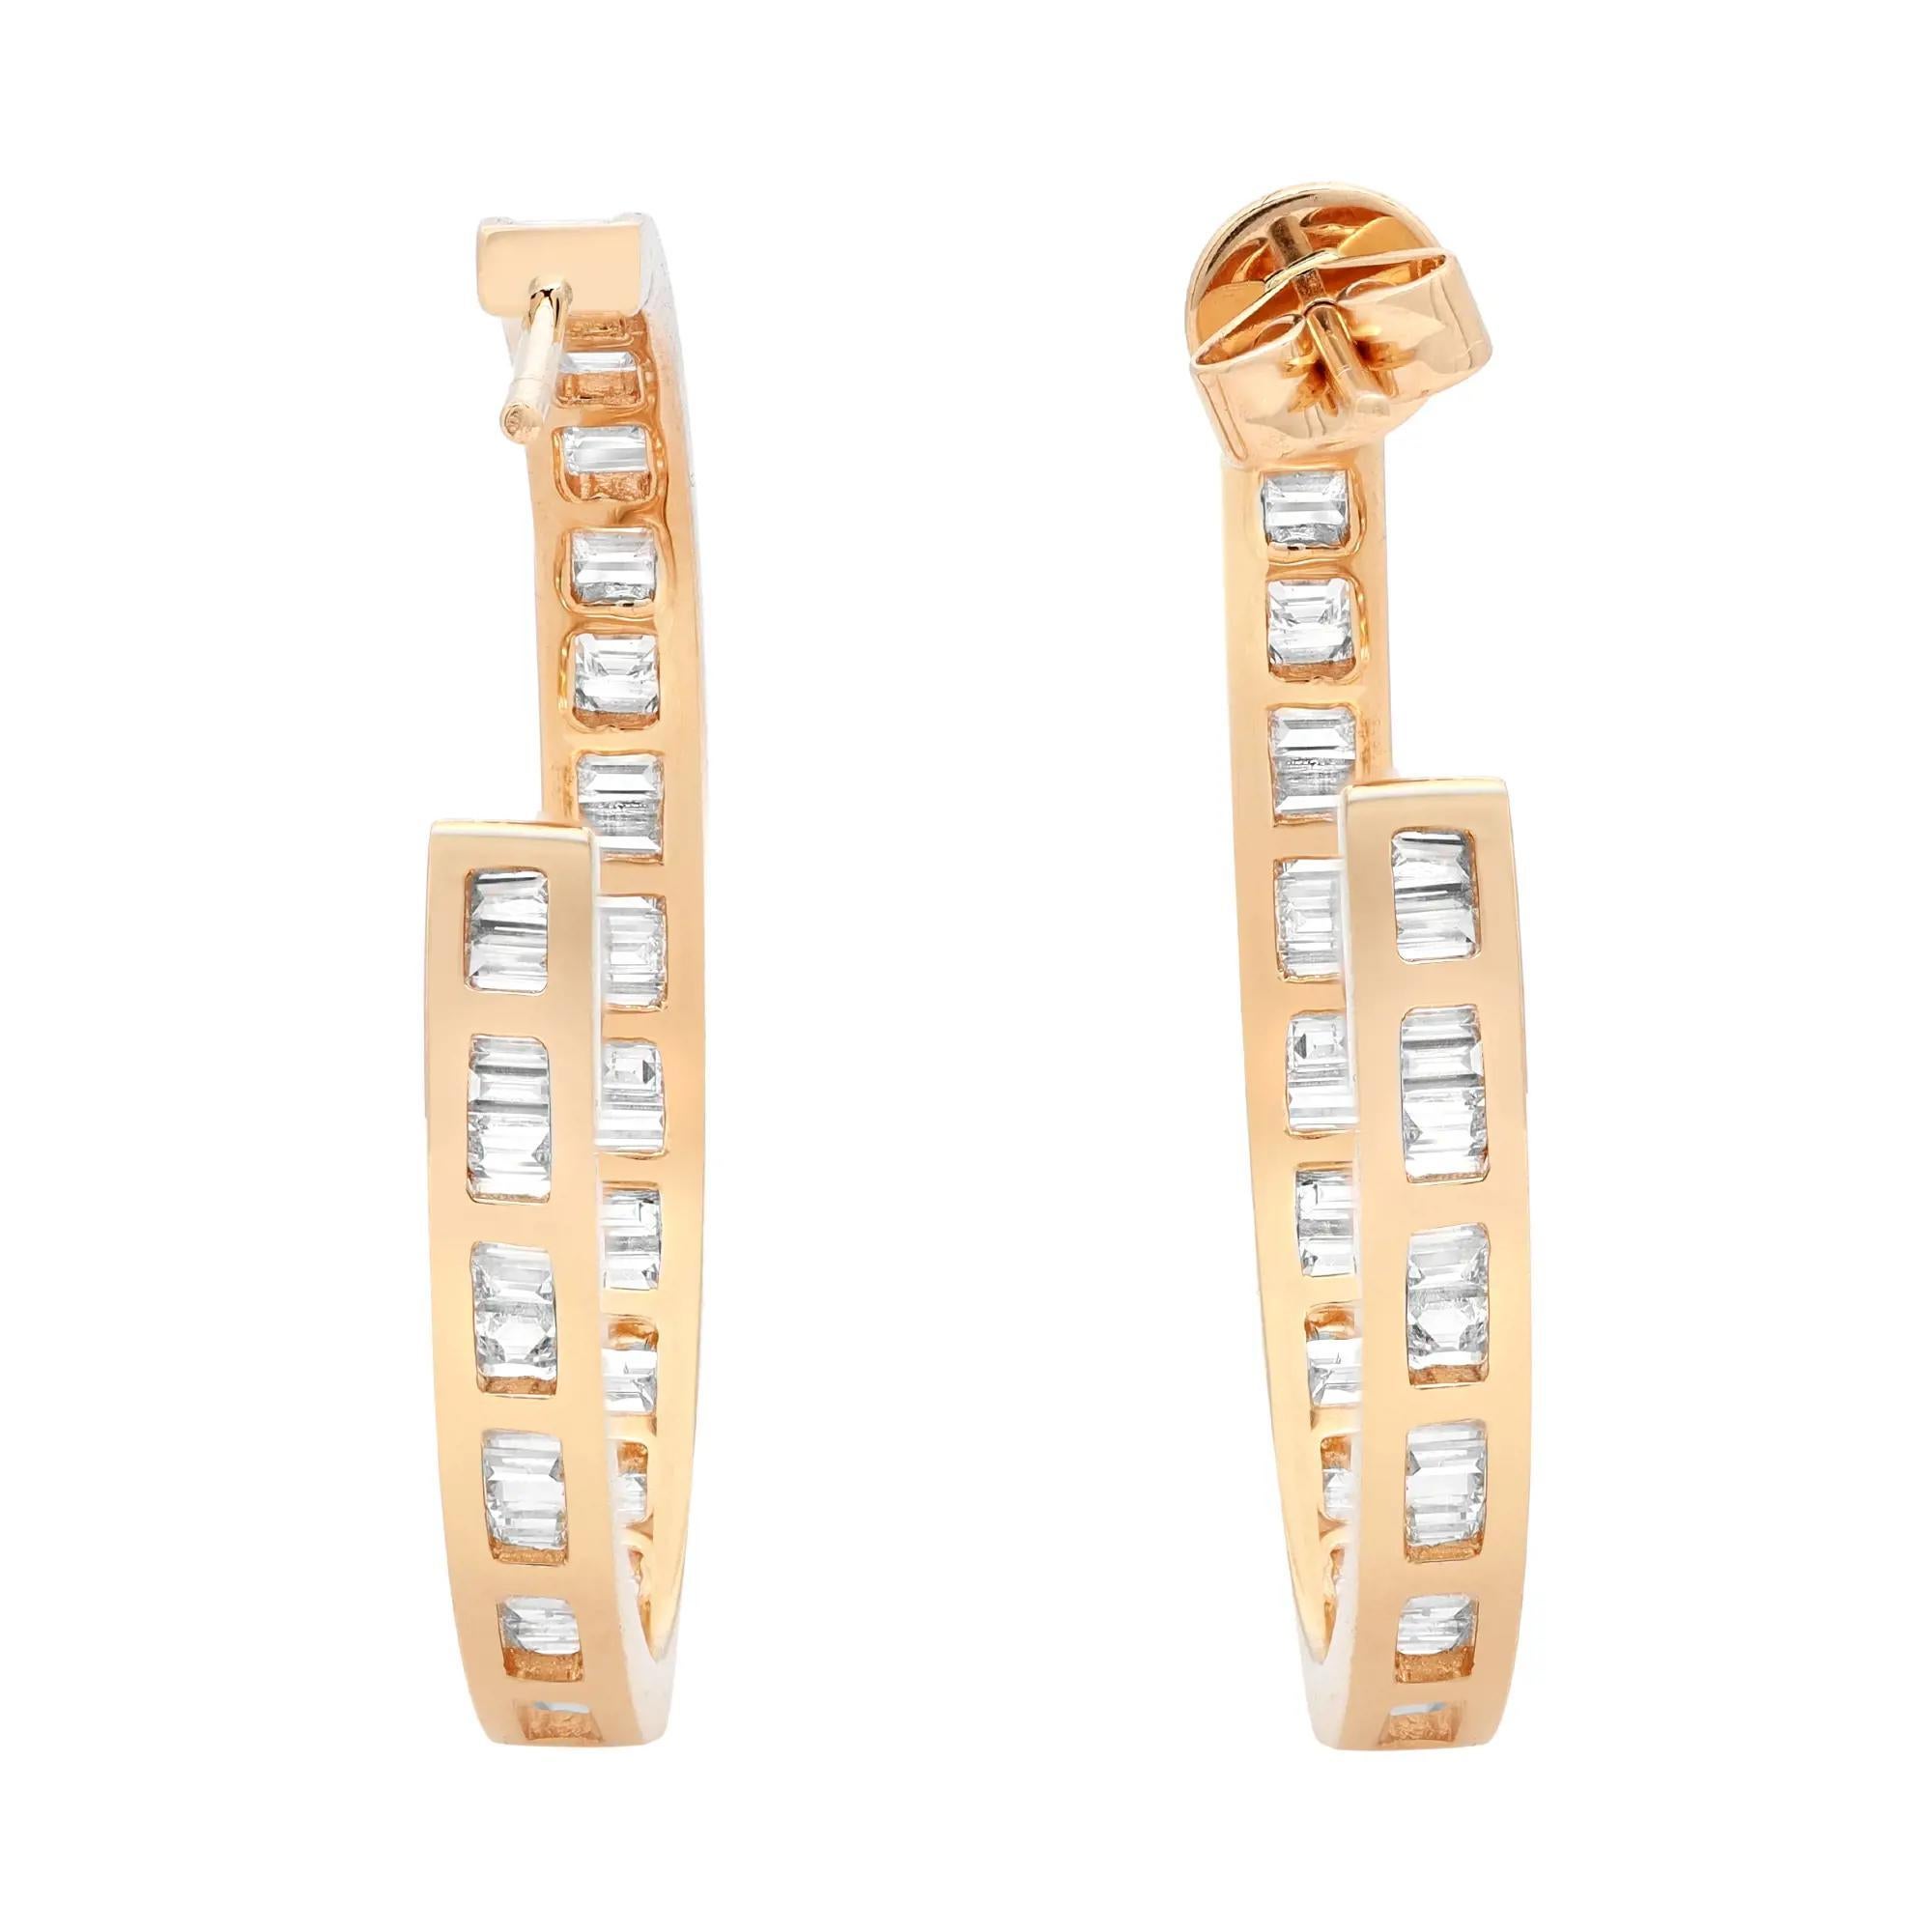 Stylish and elegant diamond hoop earrings, perfect for a great standout look. Crafted in fine 18K yellow gold, these earrings sparkle from every angle with a row of glistening baguette cut diamonds encrusted in channel setting inside out of the